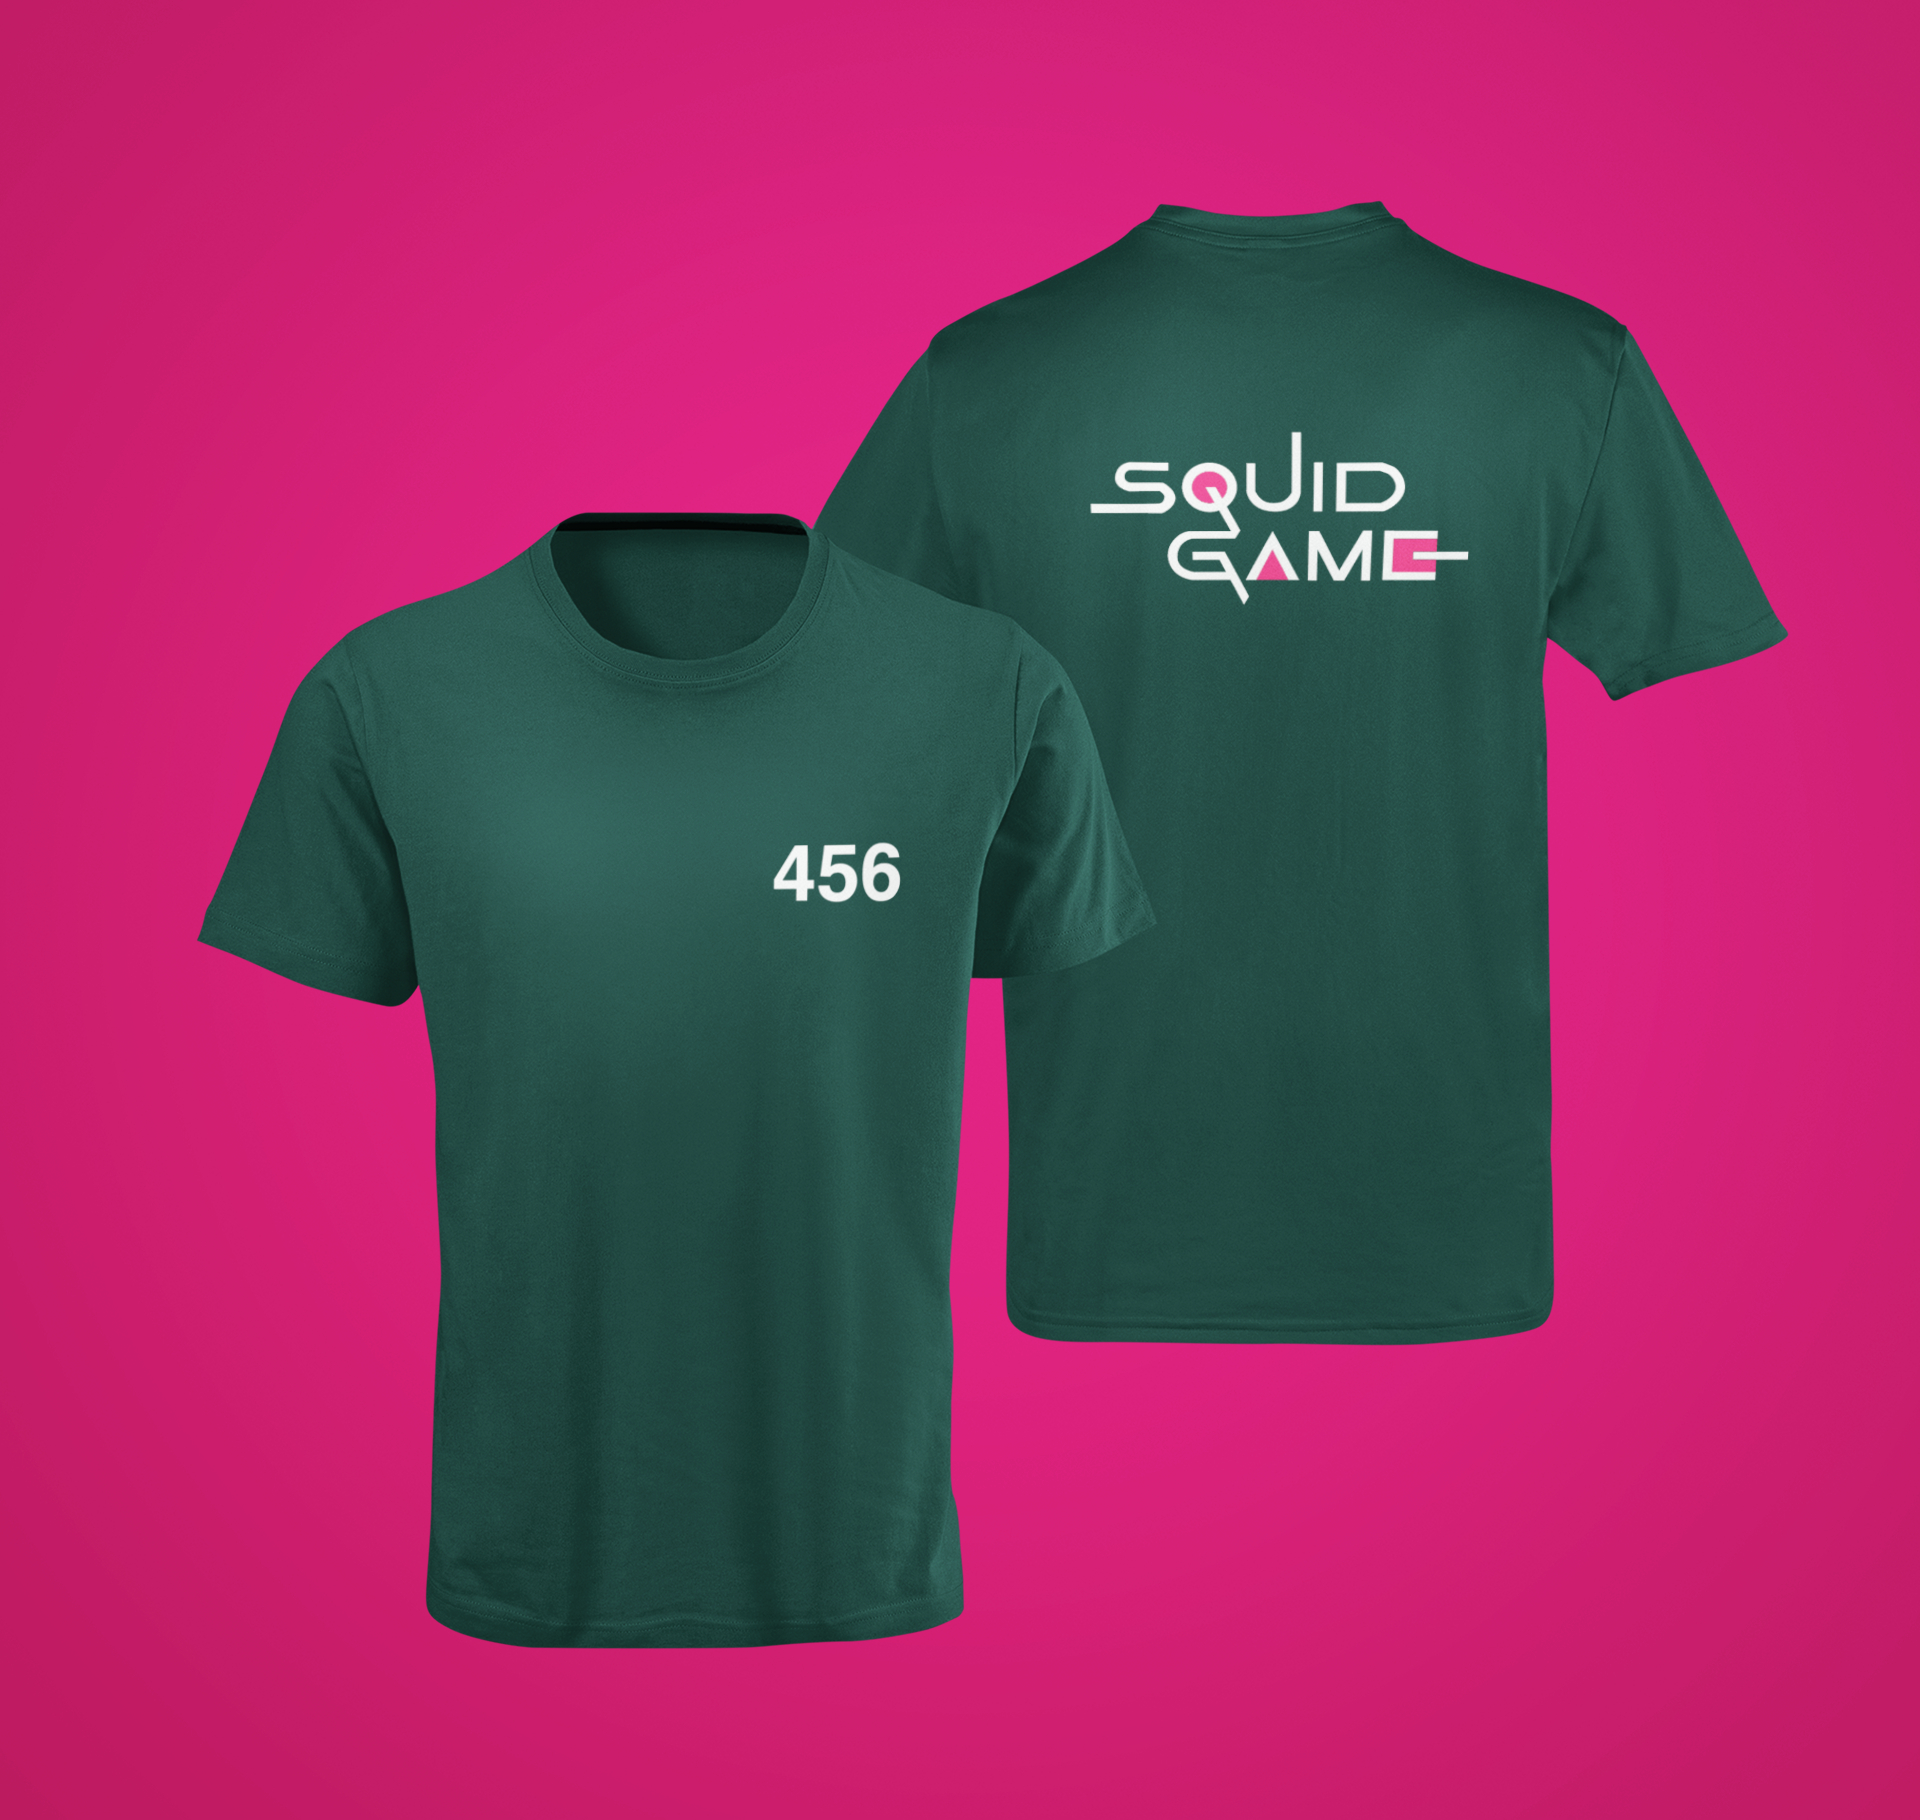 Our Squid Game T-shirts - Teepublic PDFs